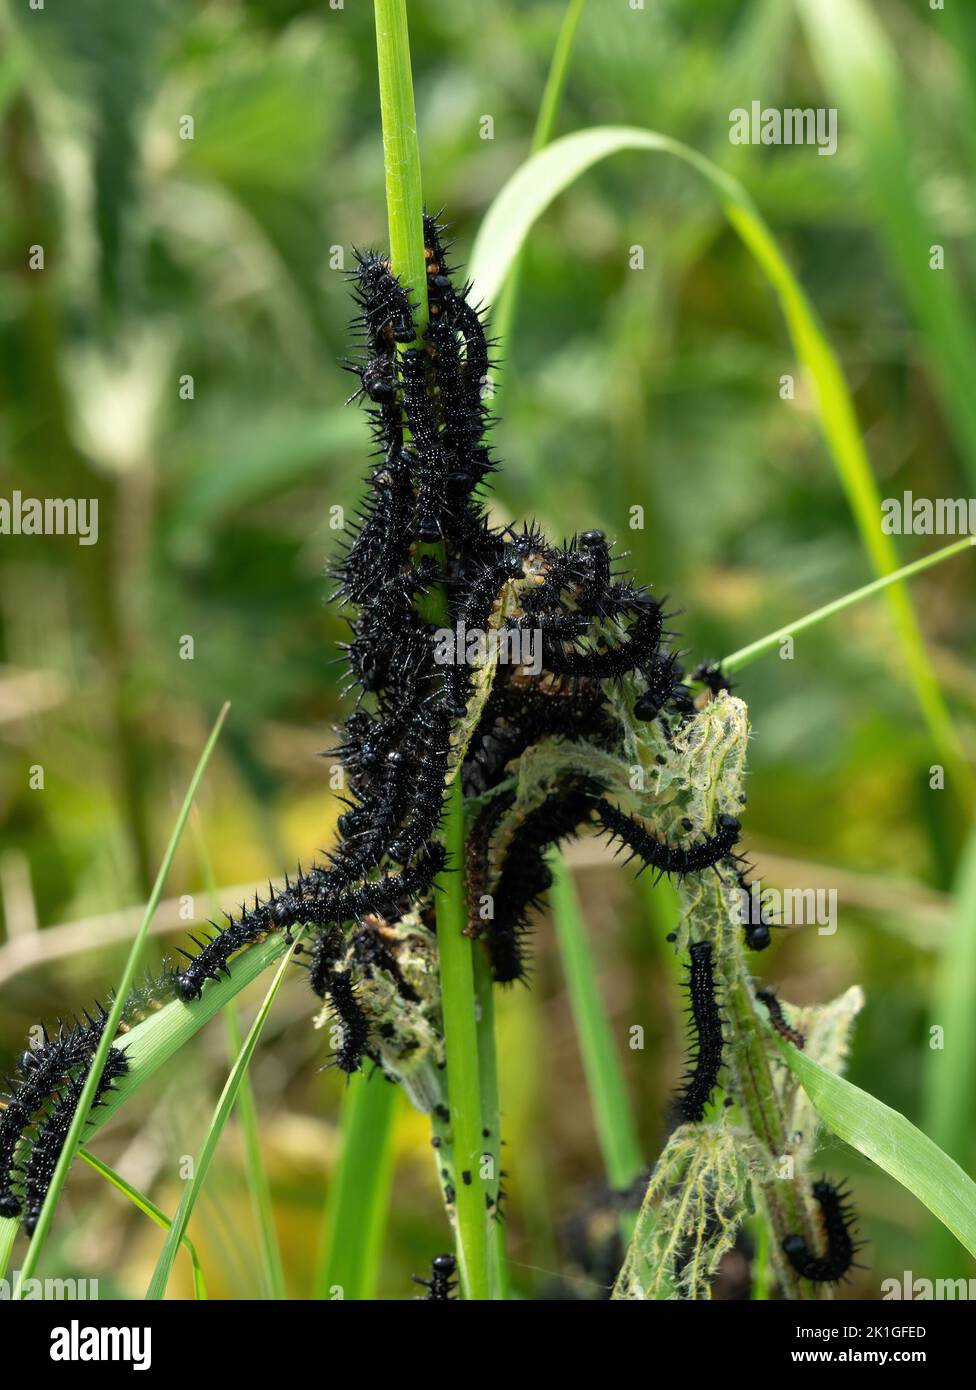 An infestation of black, hairy Peacock Butterfly caterpillars on grass stems, Leicestershire, England, UK Stock Photo